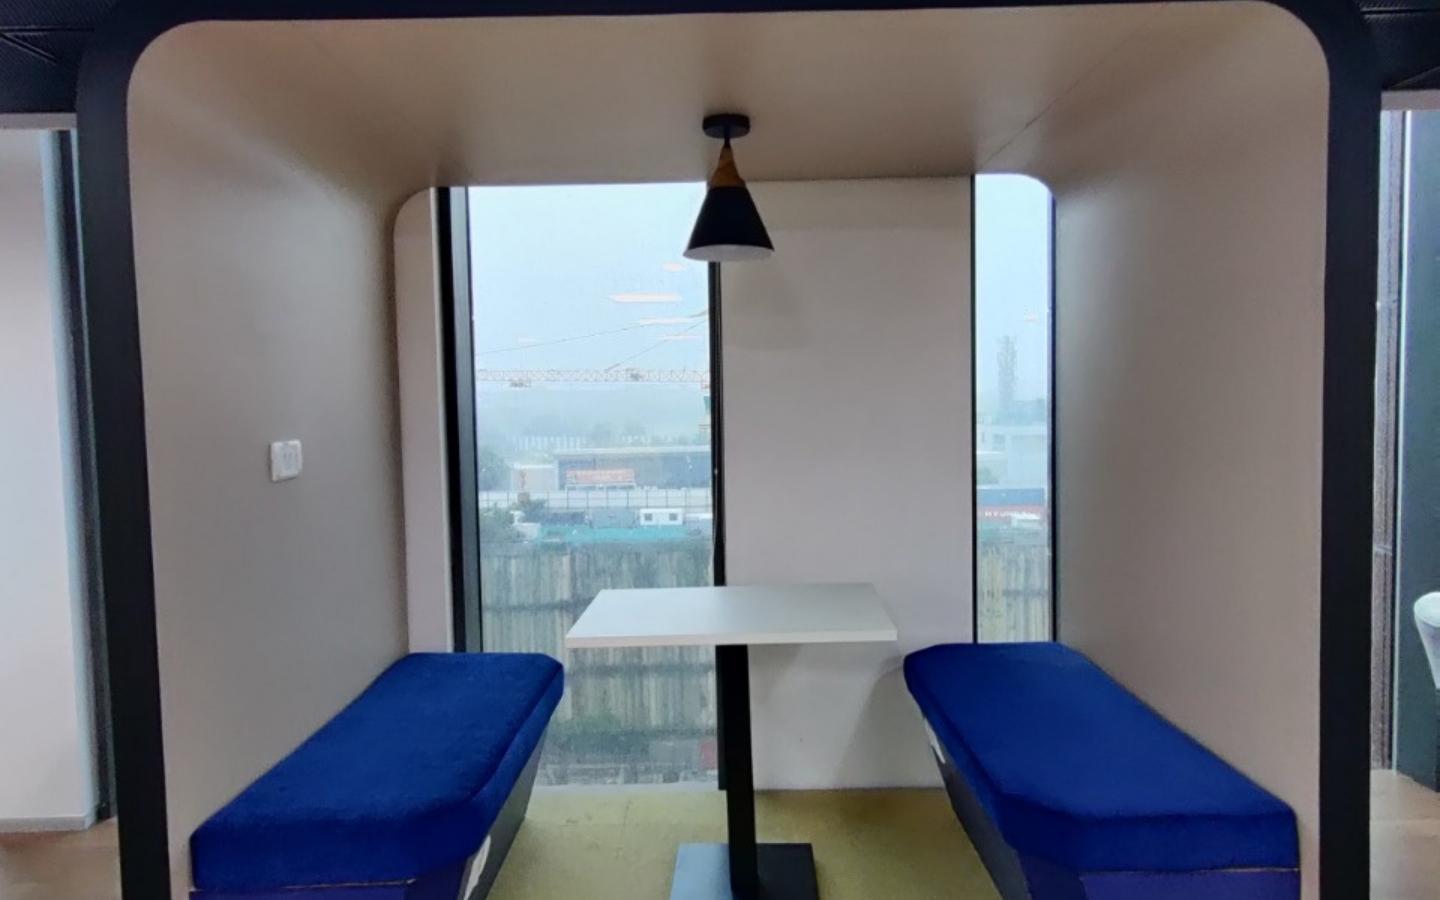 Commercial Office Space for rent in Bangalore